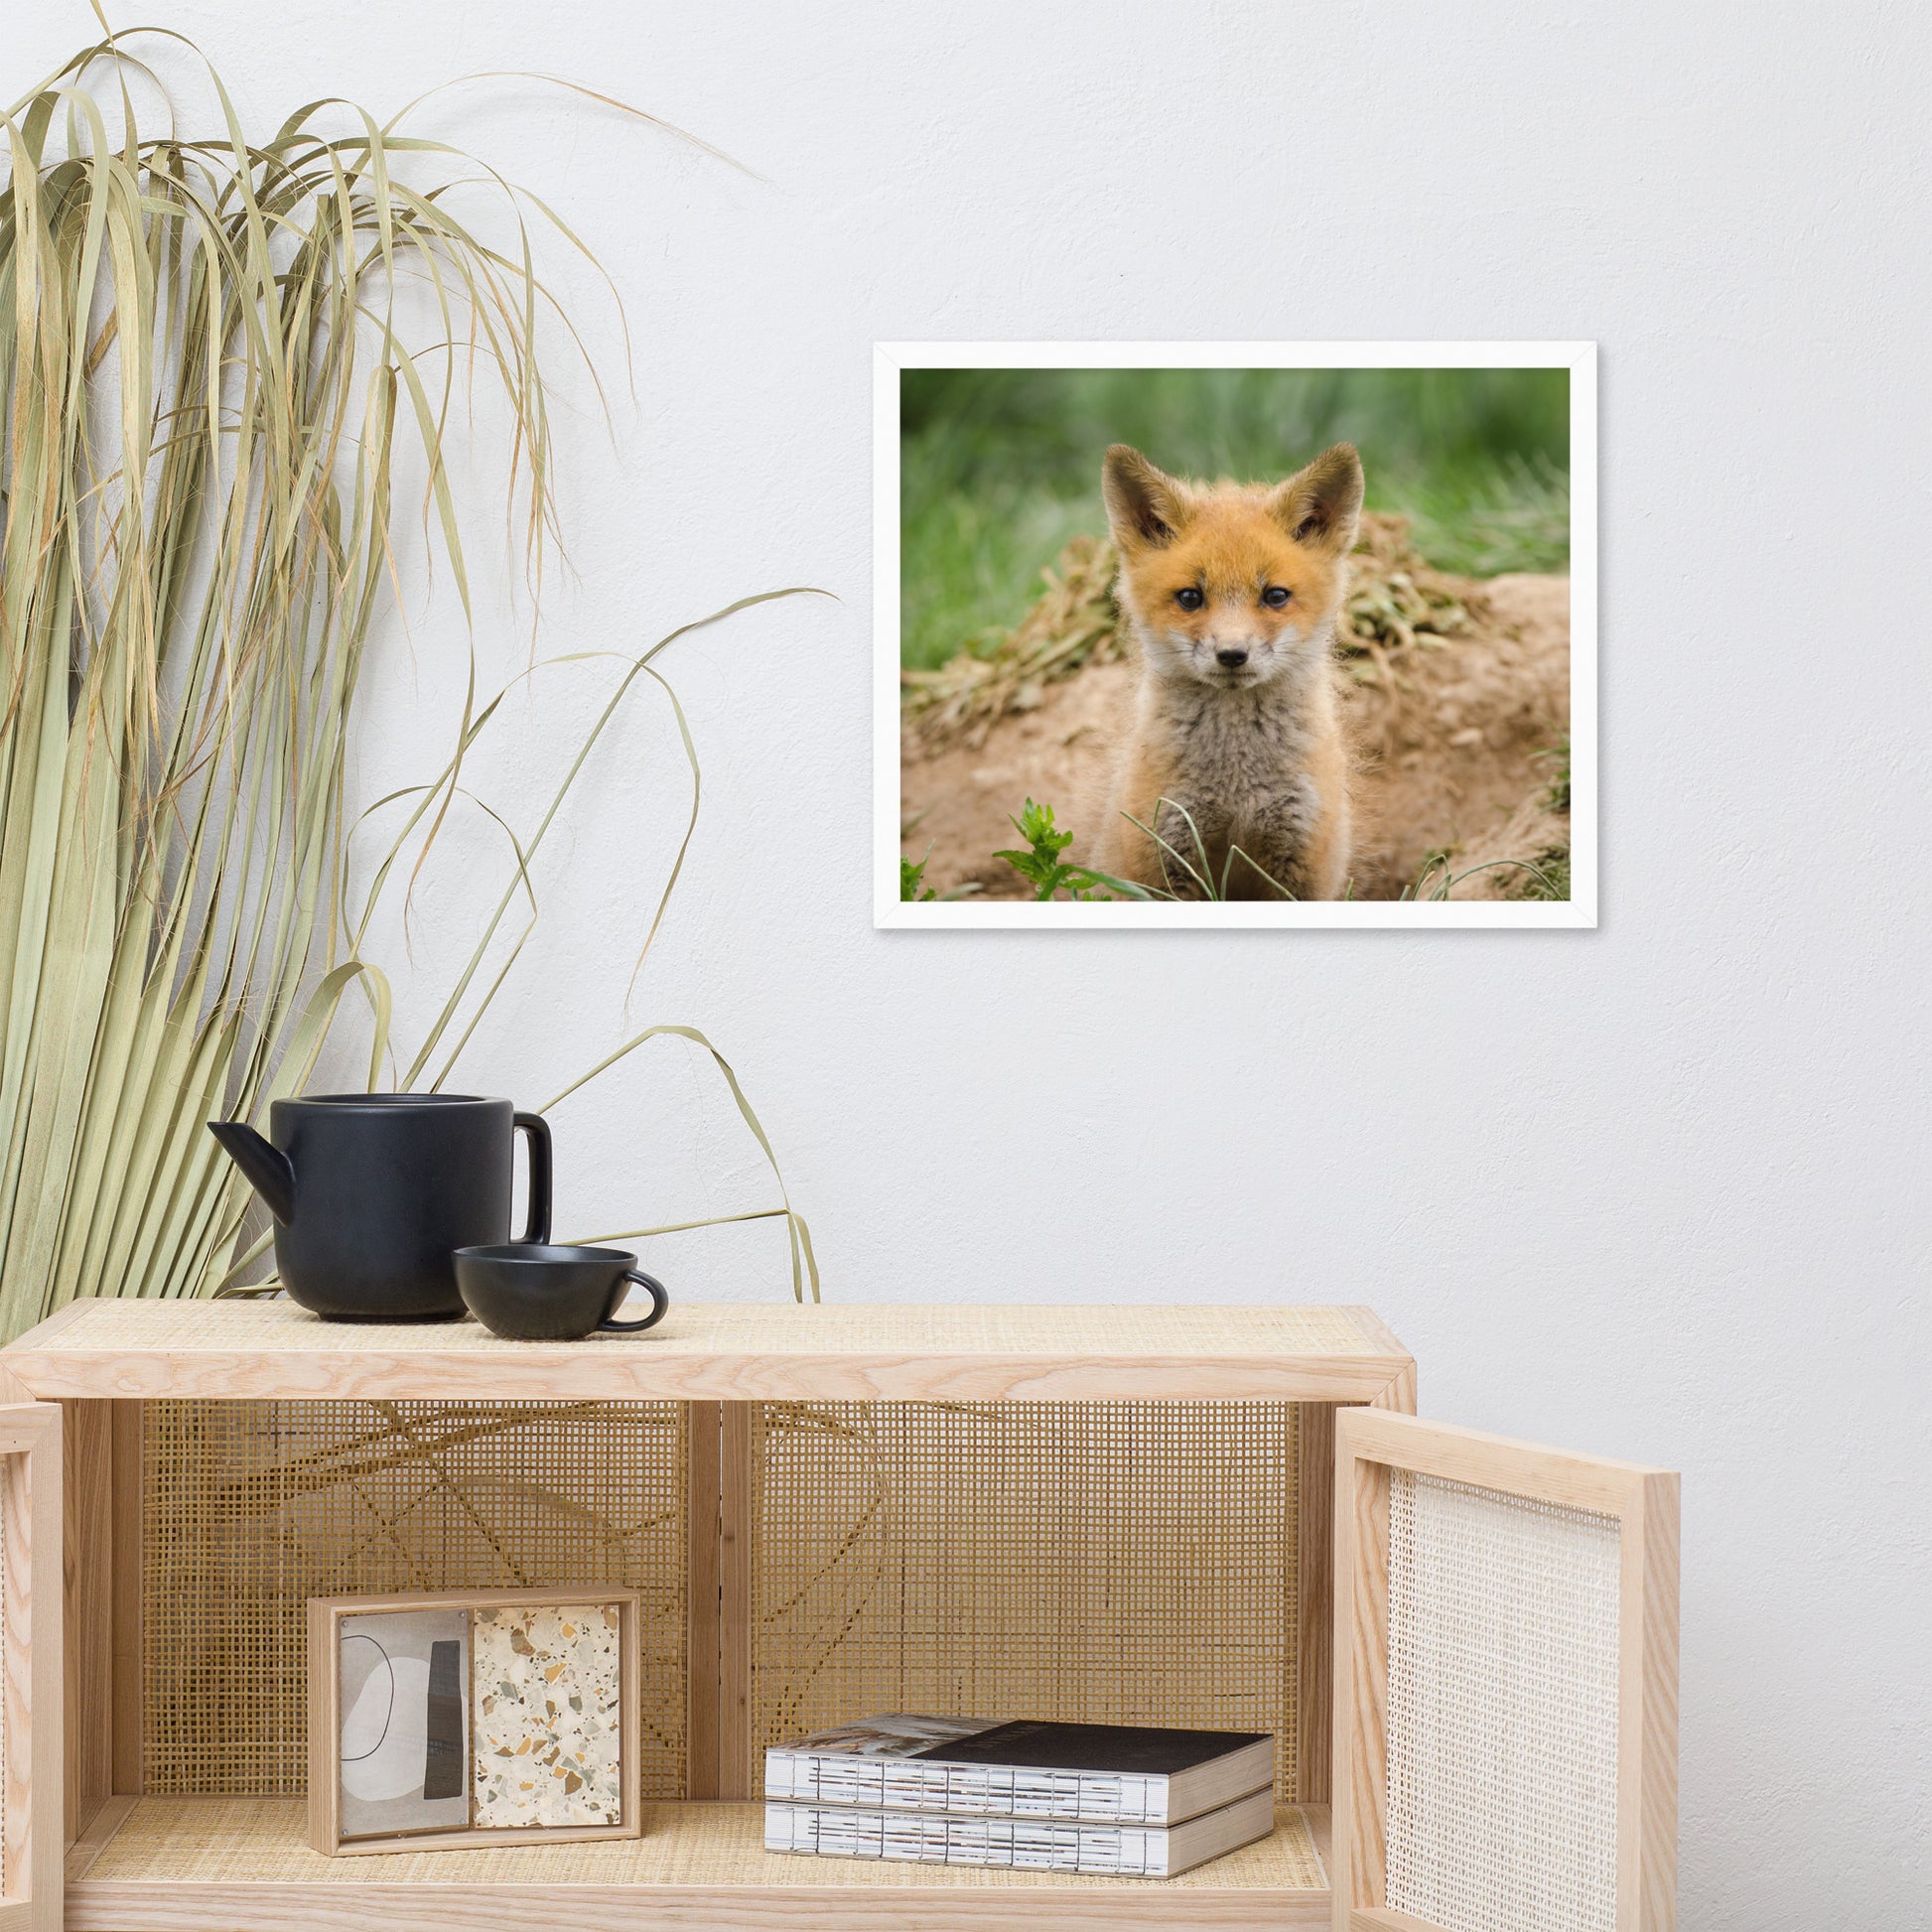 Wall Art Print For Bathroom: Baby Young Red Fox Kit/ Animal / Wildlife / Nature Photographic Artwork - Framed Artwork - Wall Decor